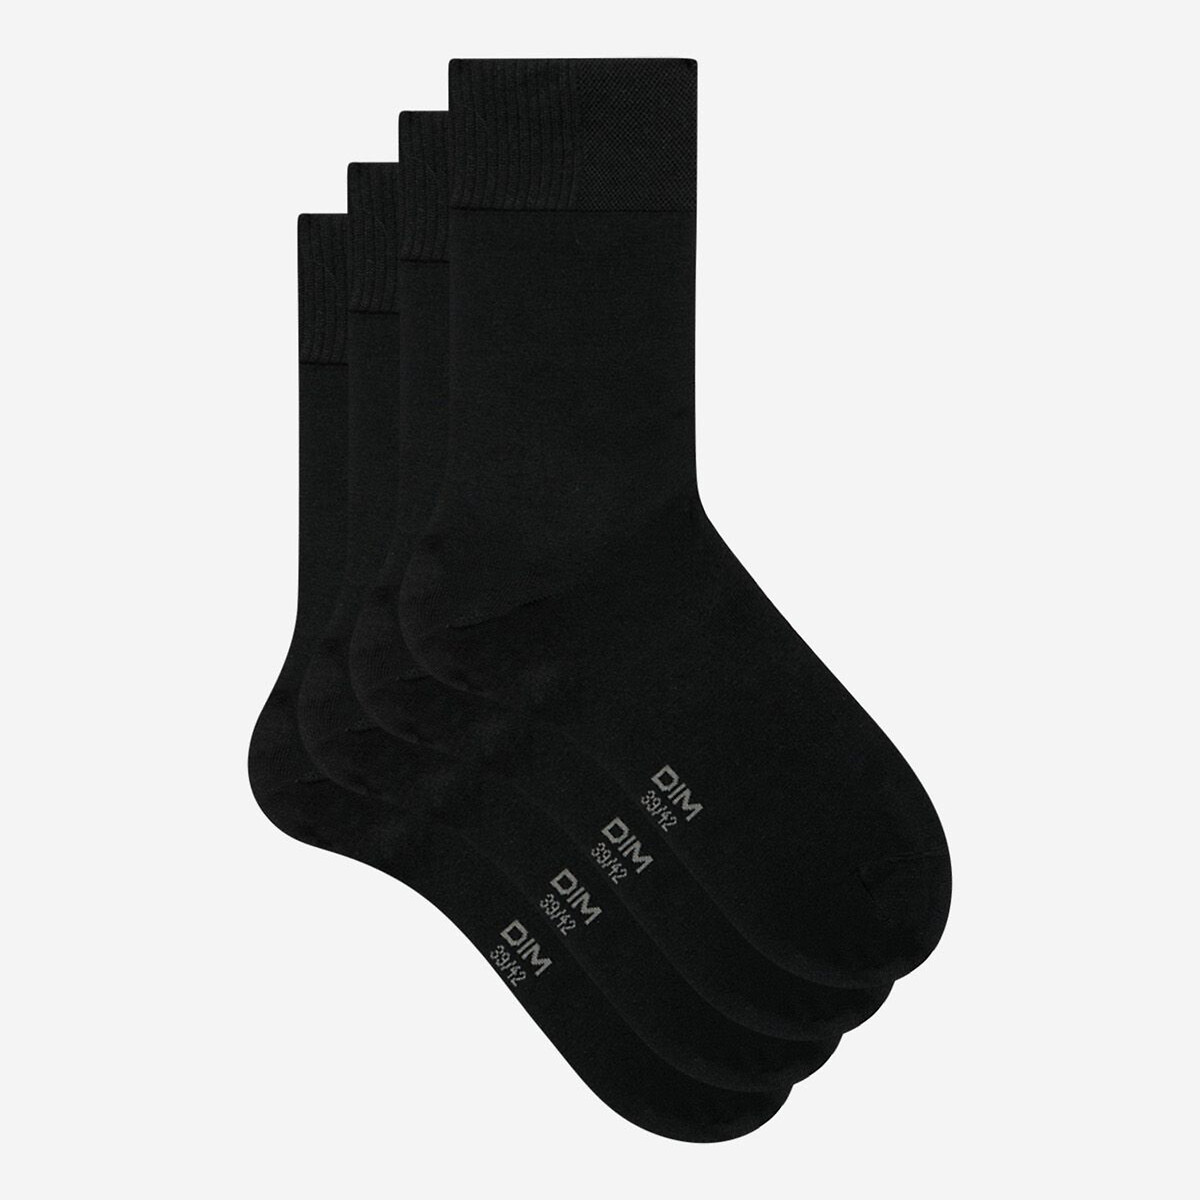 Pack of 2 Pairs of Bambou Socks